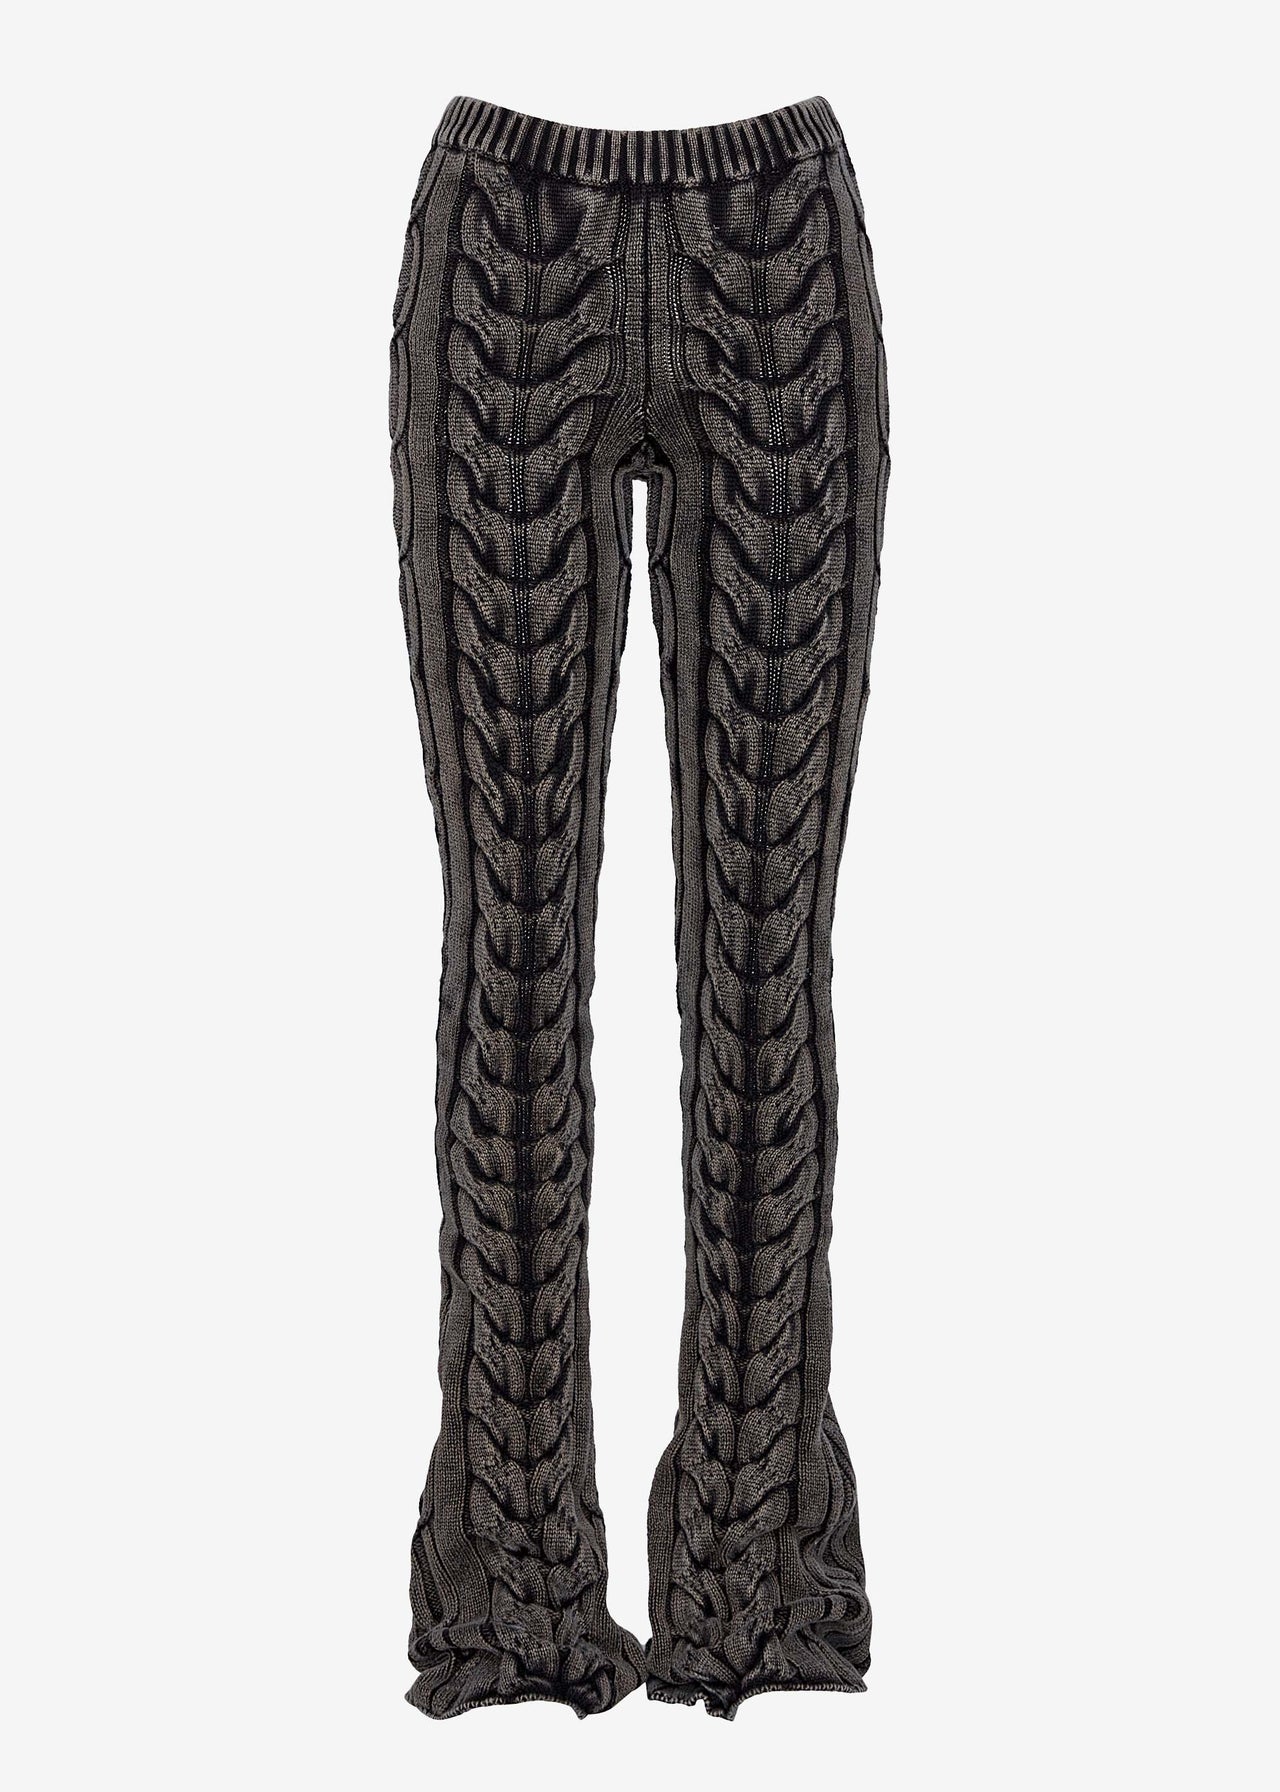 Cable-Knit Leggings | Anthropologie Singapore Official Site